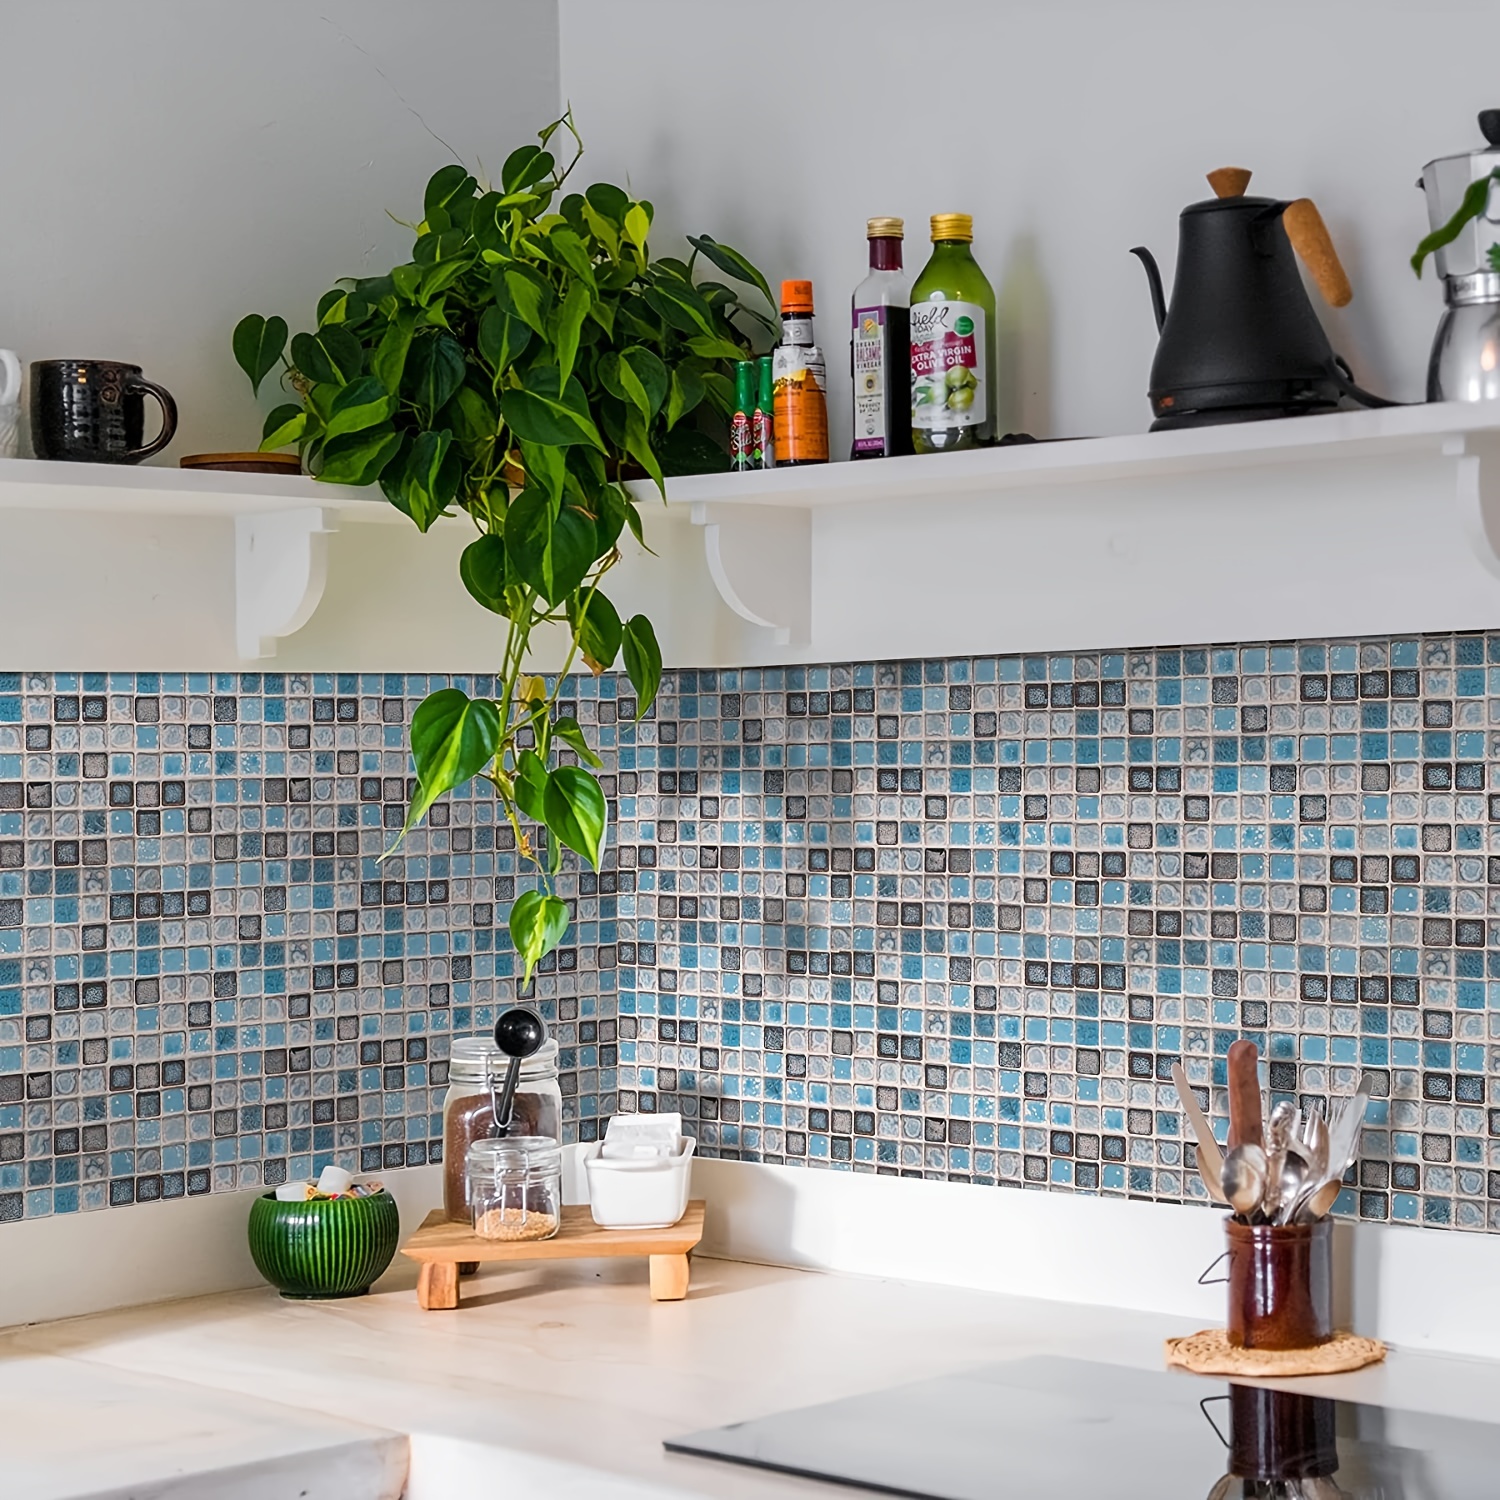 Yes, You Can Use Wallpaper as a Kitchen Backsplash